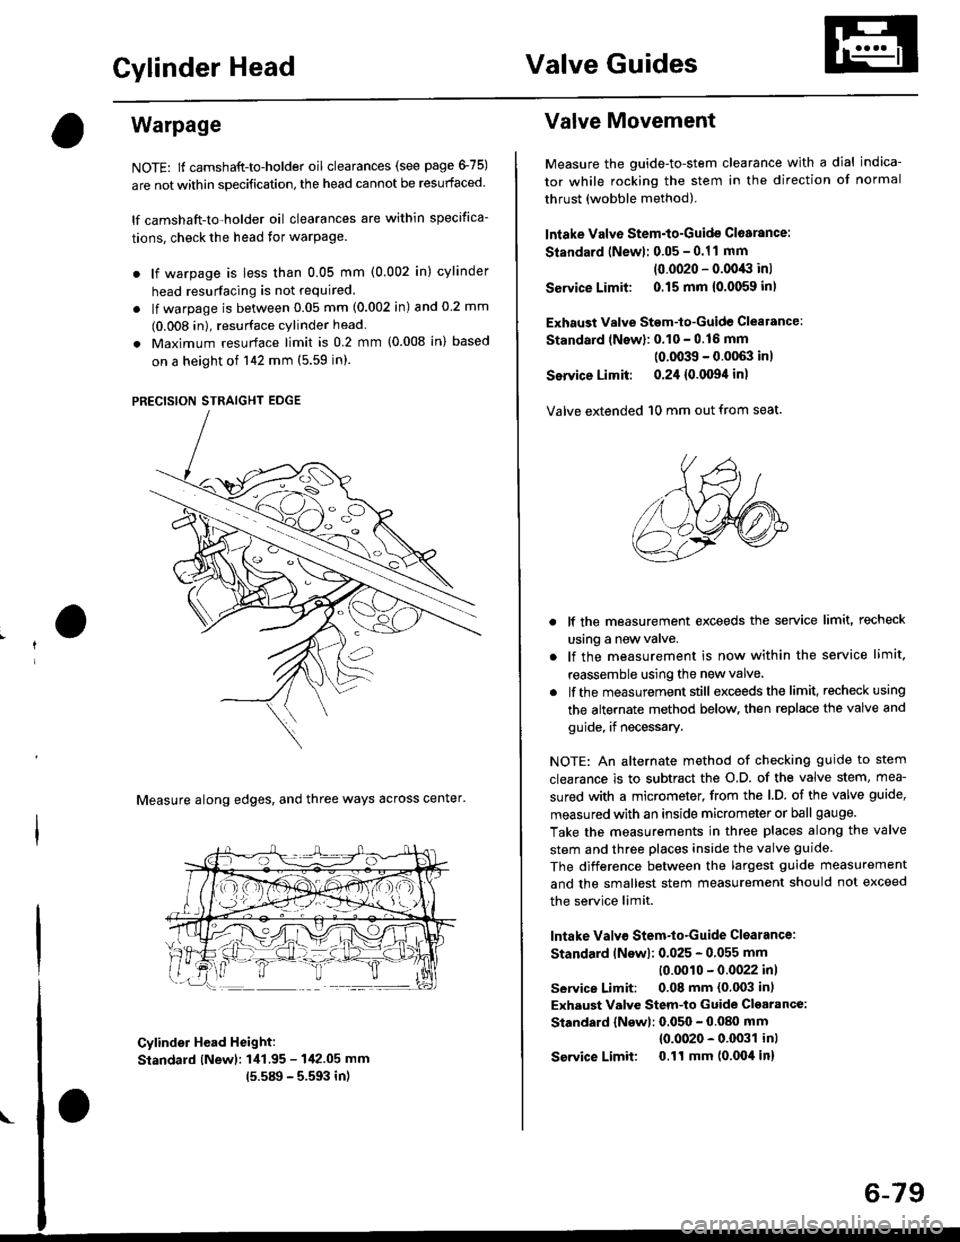 HONDA CIVIC 1996 6.G Service Manual Cylinder HeadValve Guides
Warpage
NOTE: lf camshaft-to-holder oil clearances (see page 475)
are not within specification, the head cannot be resurfaced.
lf camshaft-to-holder oil clearances are within